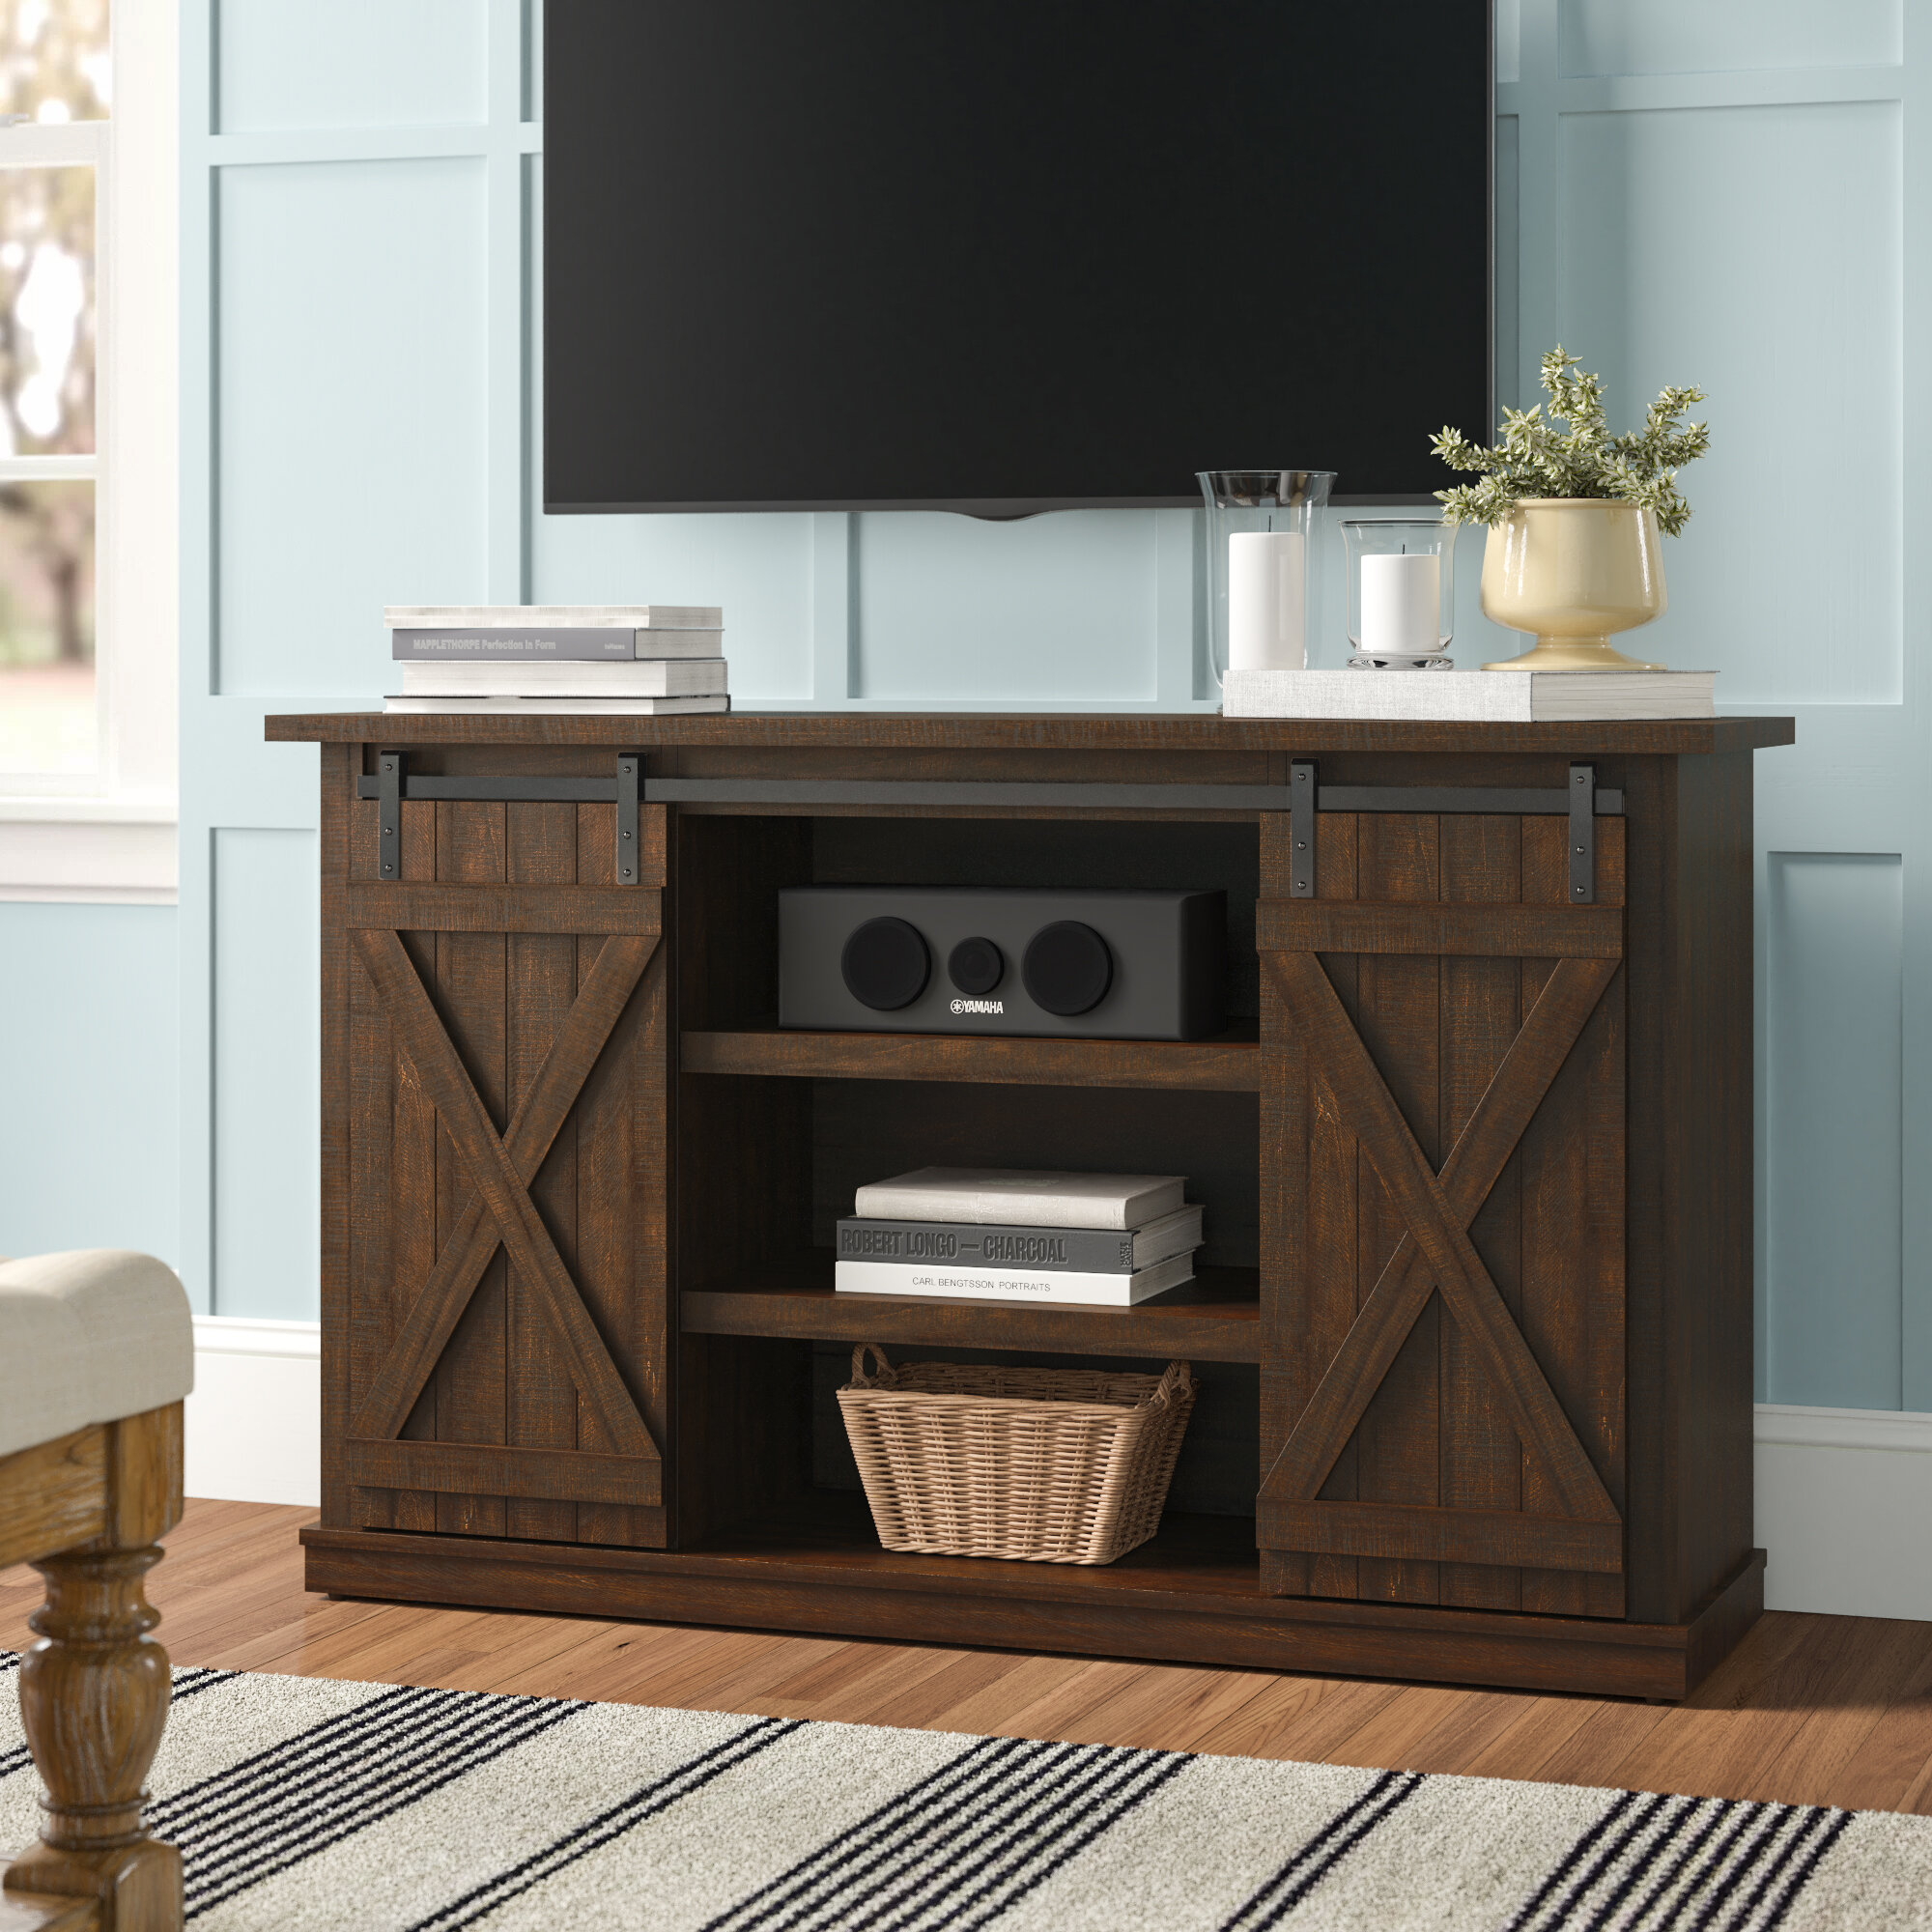 Rustic Hand Crafted 3 tier Shelf/TV Stand Cabinet